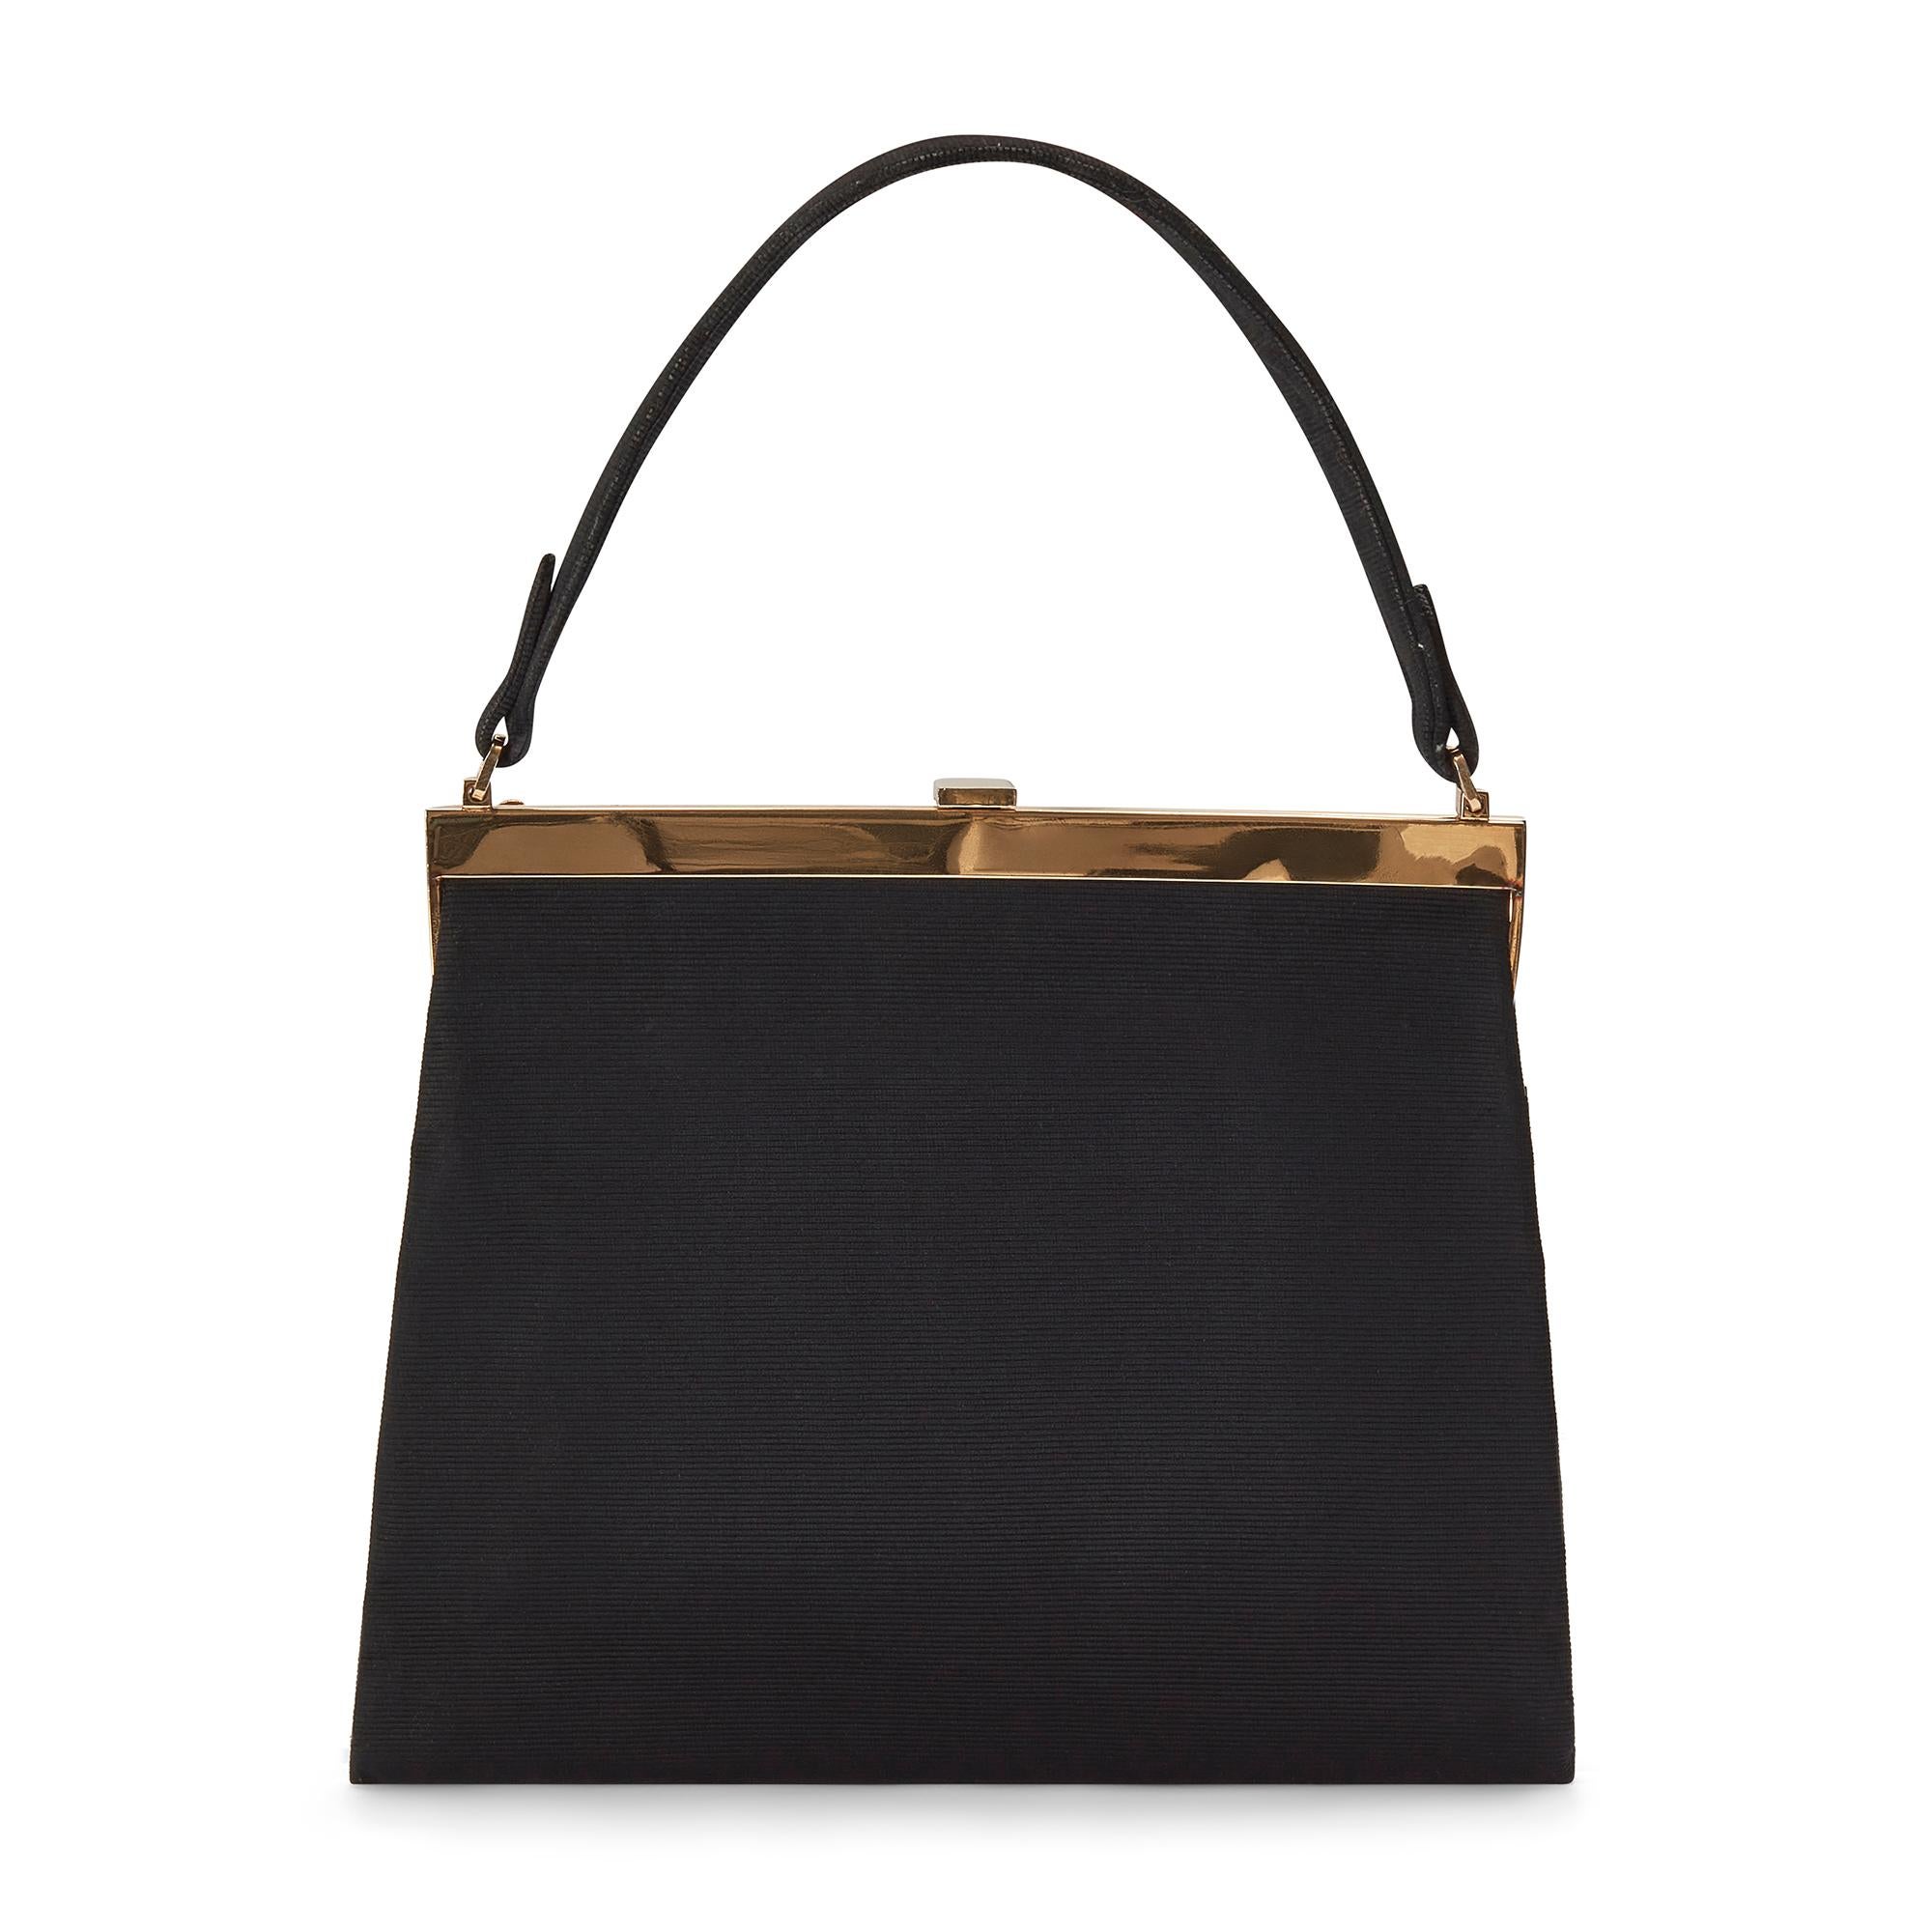 This elegant bag was made for Fortnum & Mason in the 1950s. Crafted from black silk grosgrain, it has a slim profile and an envelope design, complete with a bow. The short handle is made from coordinating grosgrain silk. The gold-toned hardware is